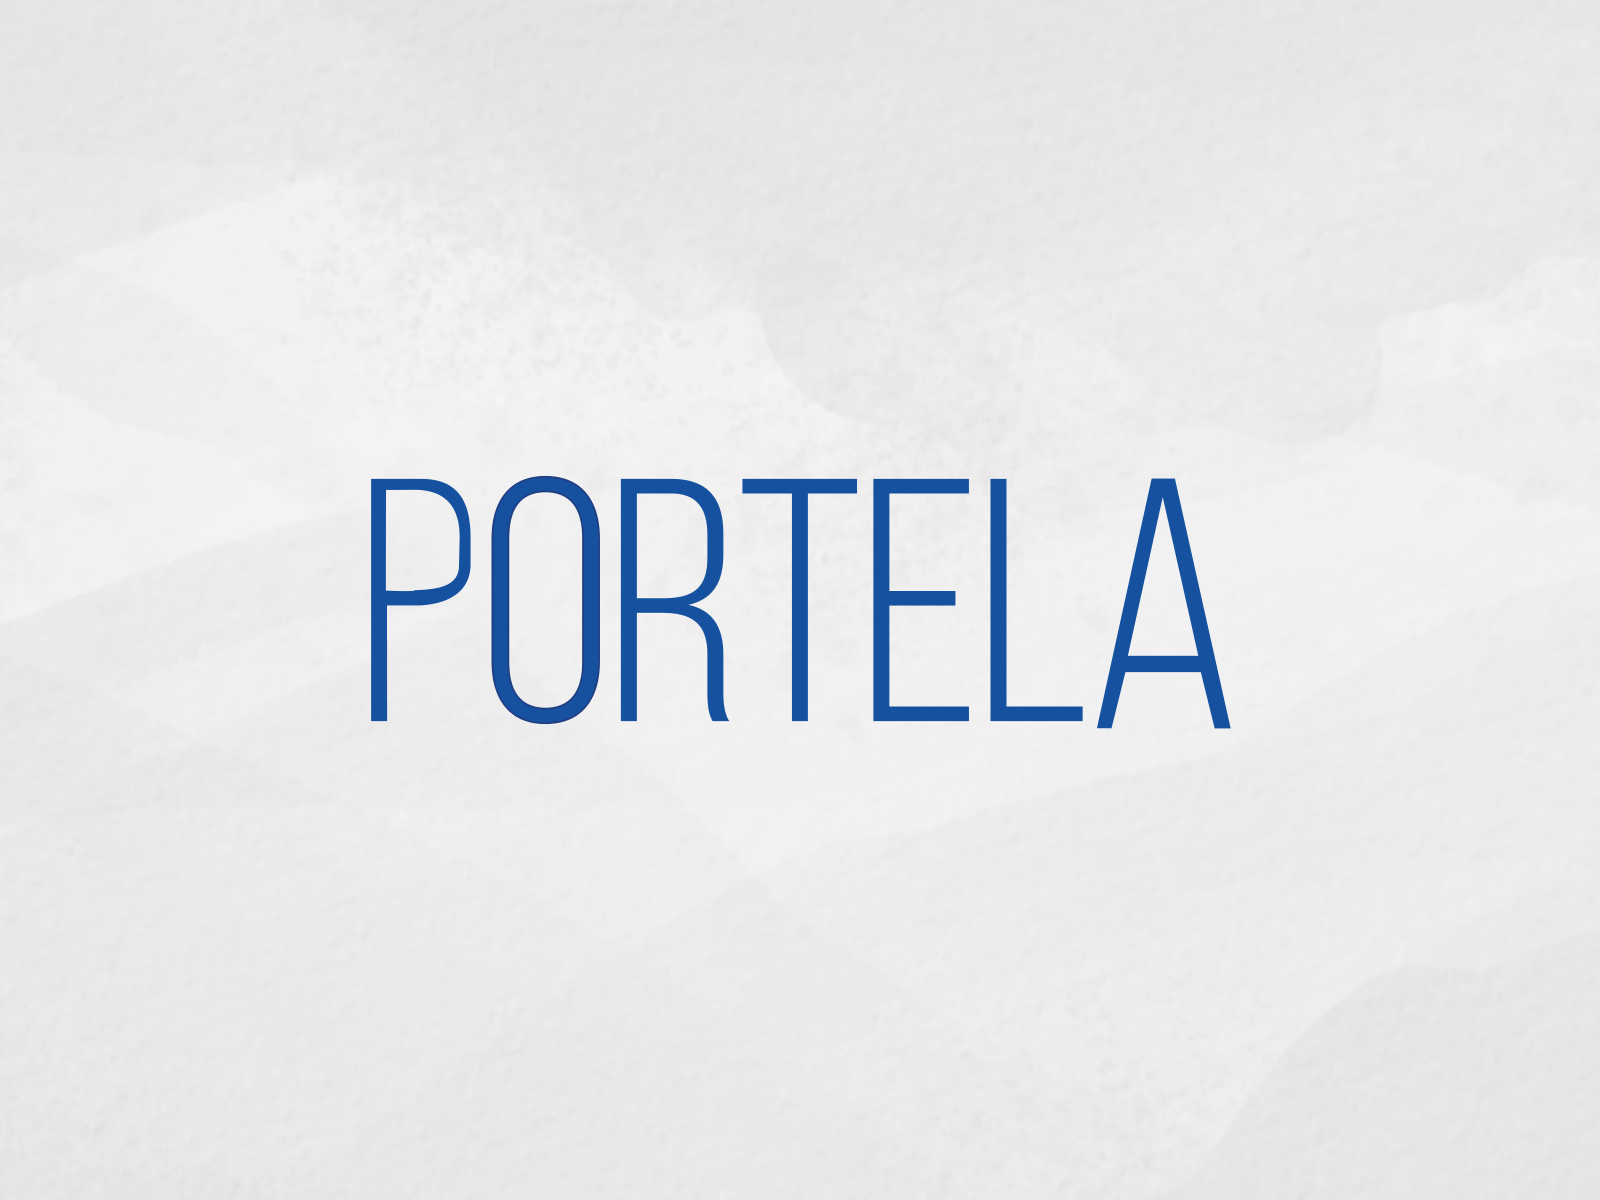 Stretched Text - Portela